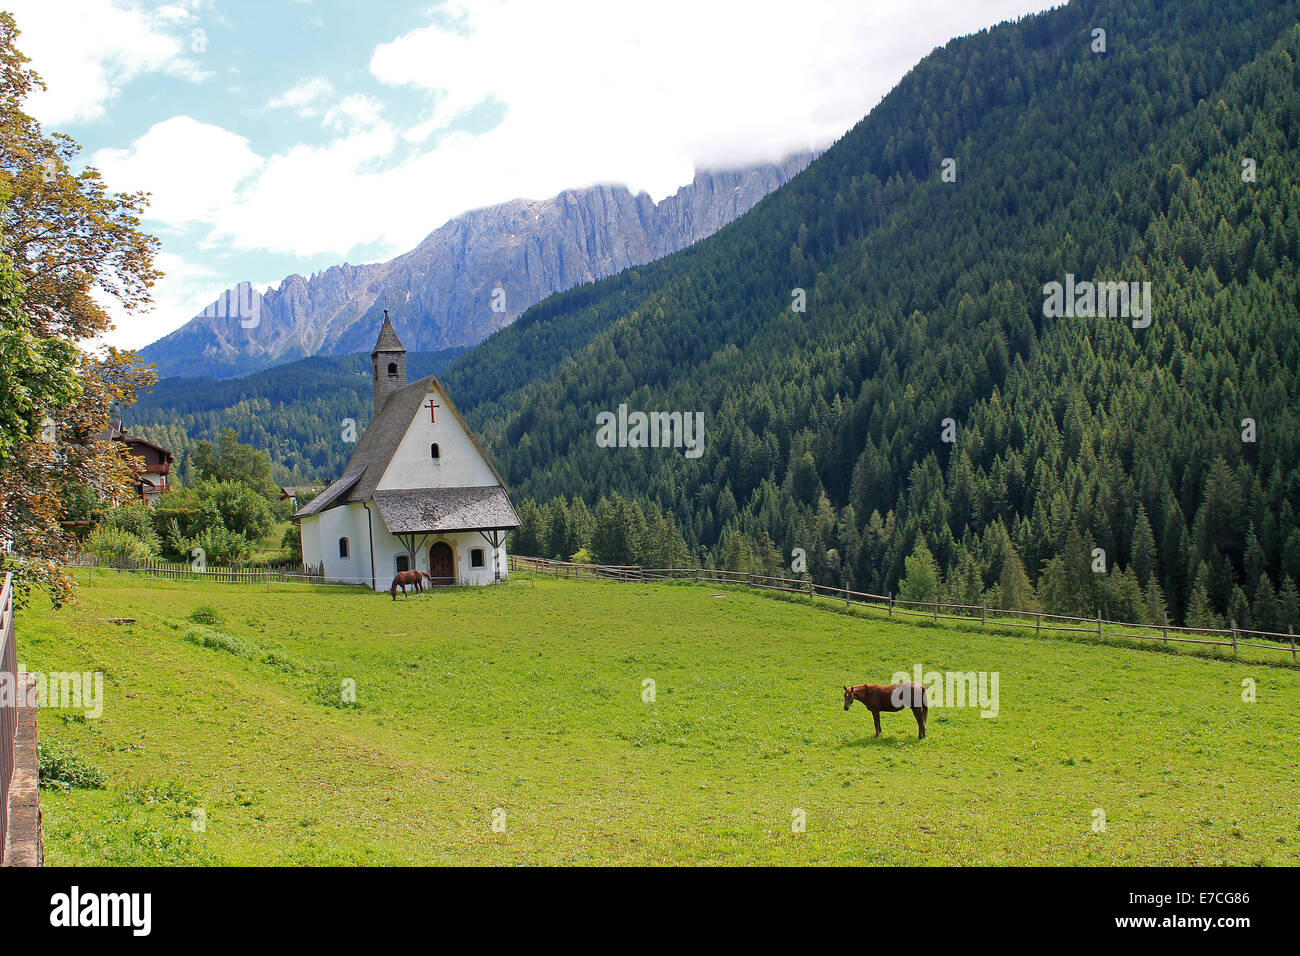 Horses in front of a little church in the mountains Stock Photo